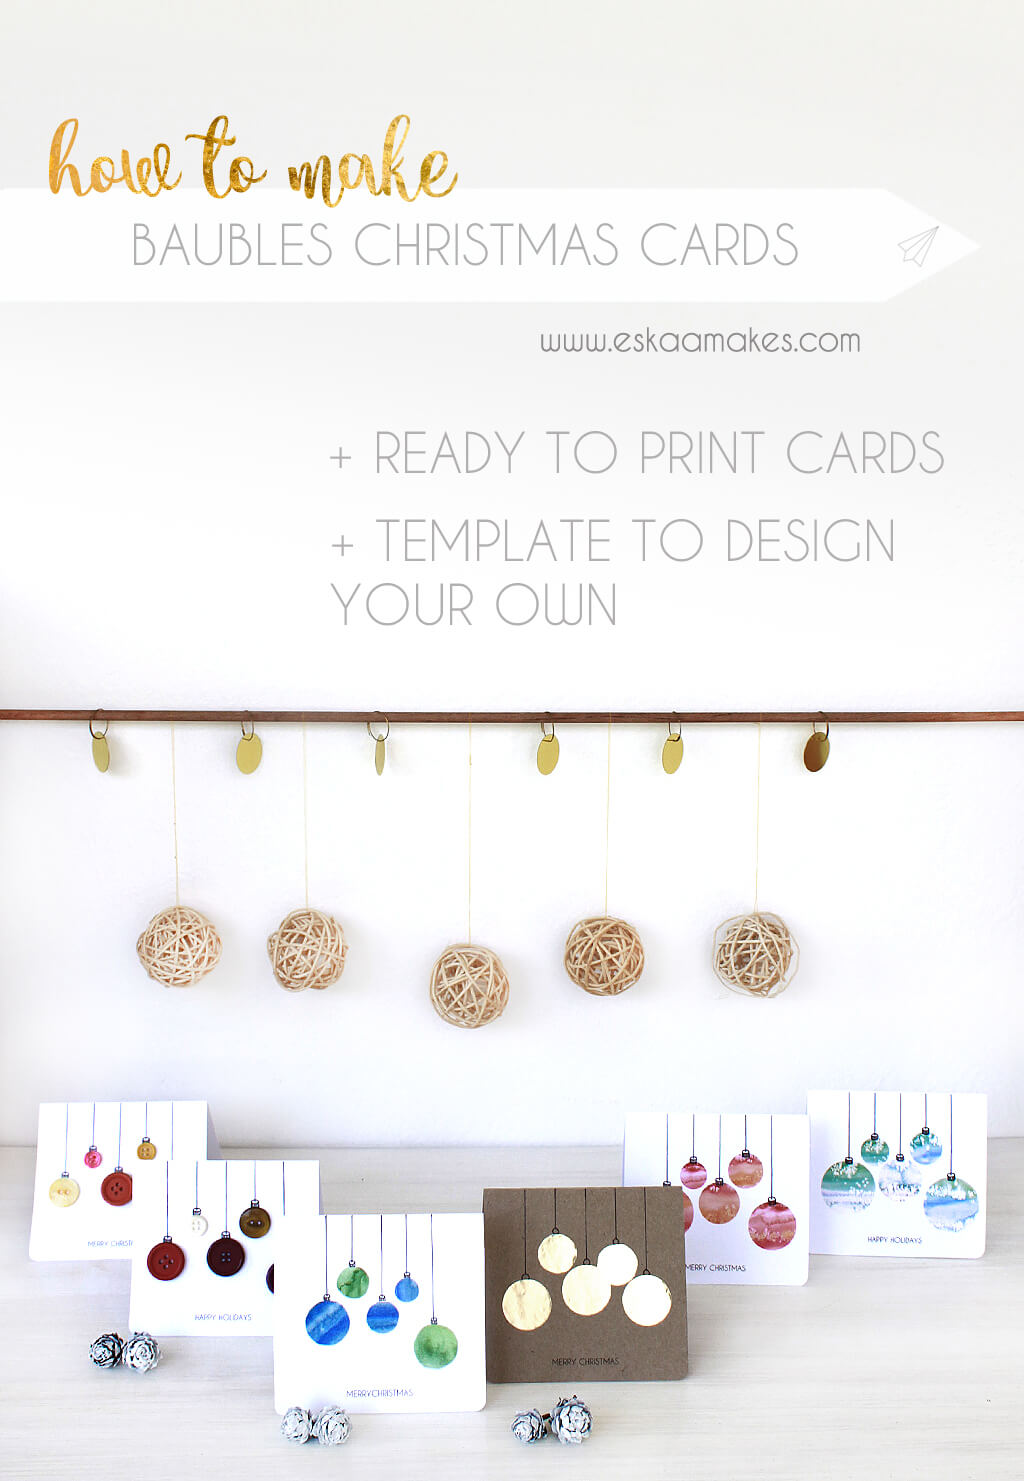 Print Your Own Christmas Cards Templates ] – Design And Inside Print Your Own Christmas Cards Templates